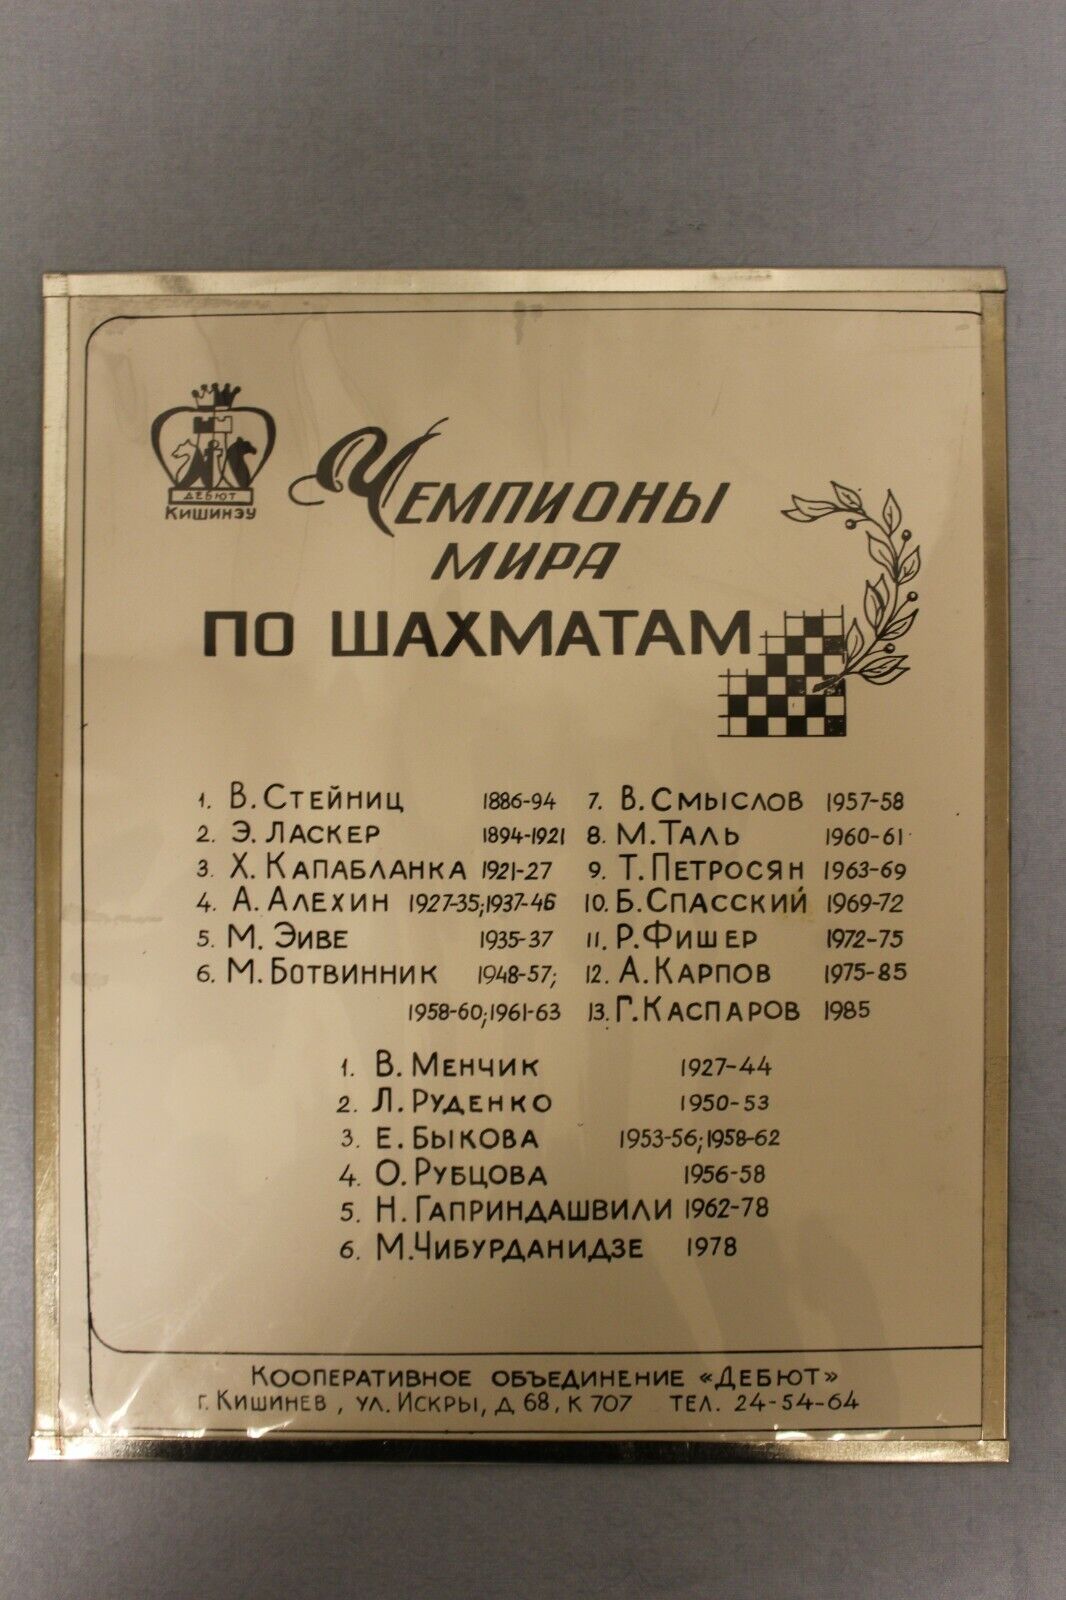 19 Portraits in Metal Frames of the World Chess Champions 29x23 cm